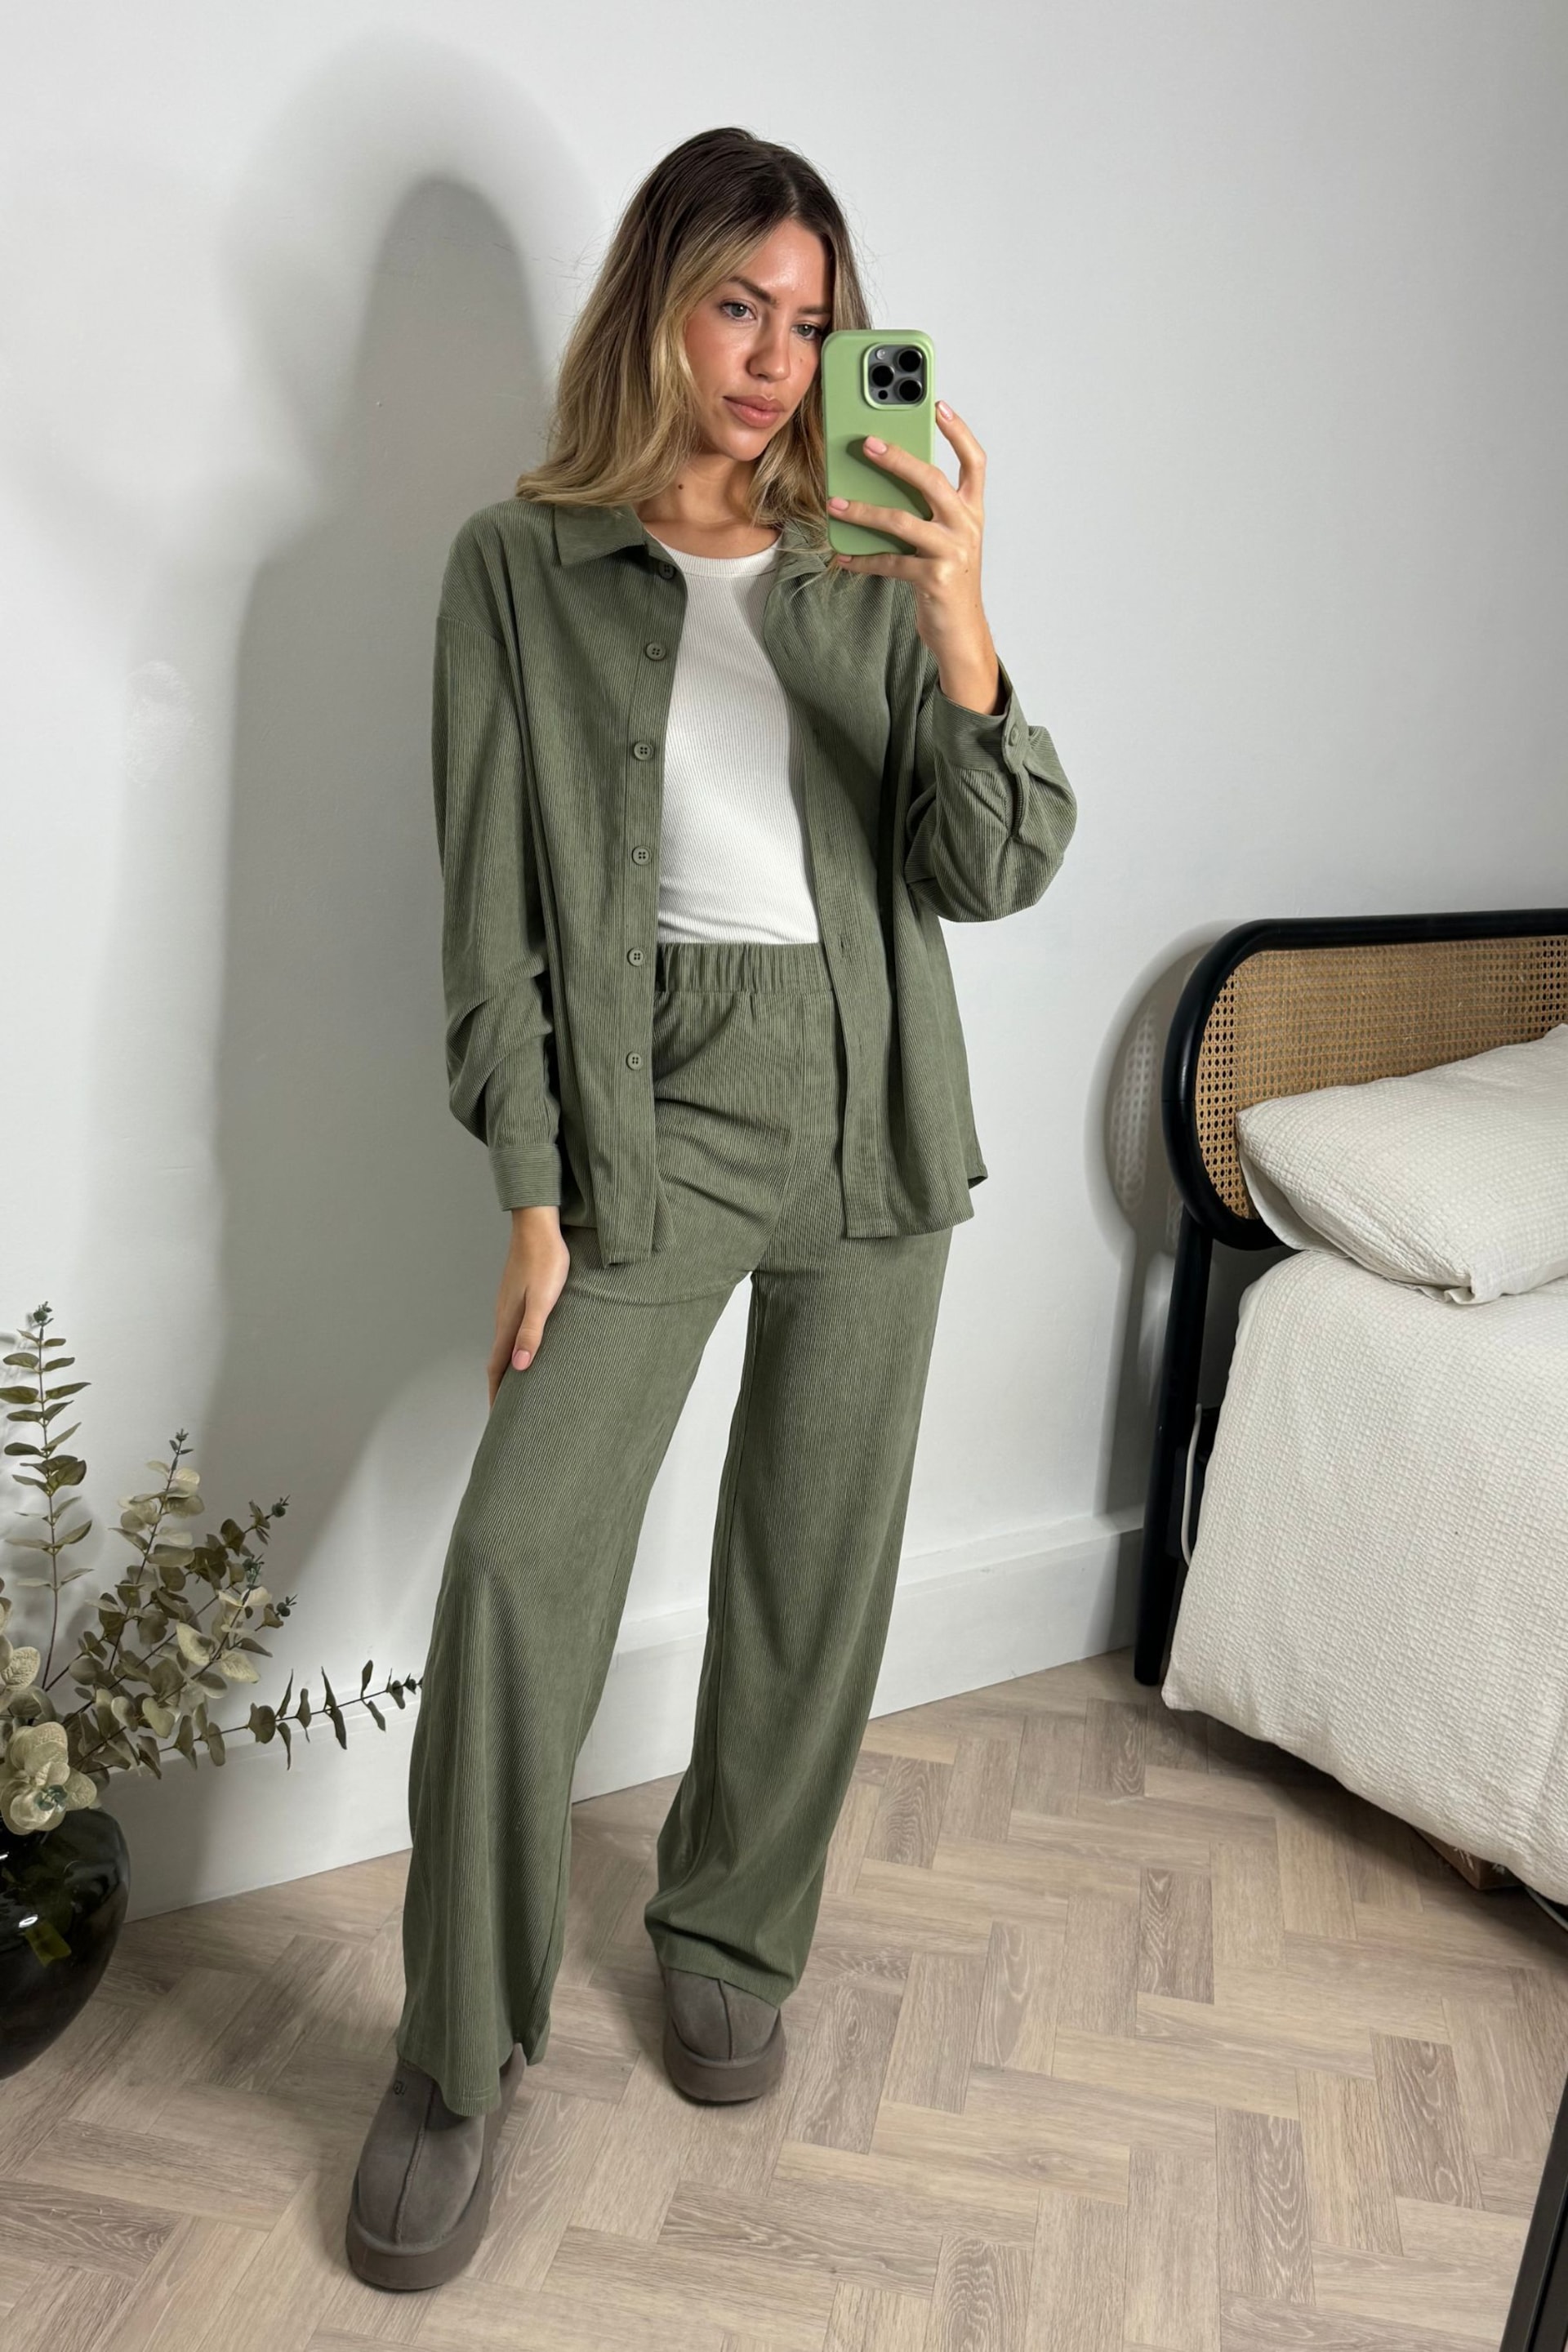 Style Cheat Green Lottie Corduroy Trousers - Image 1 of 5